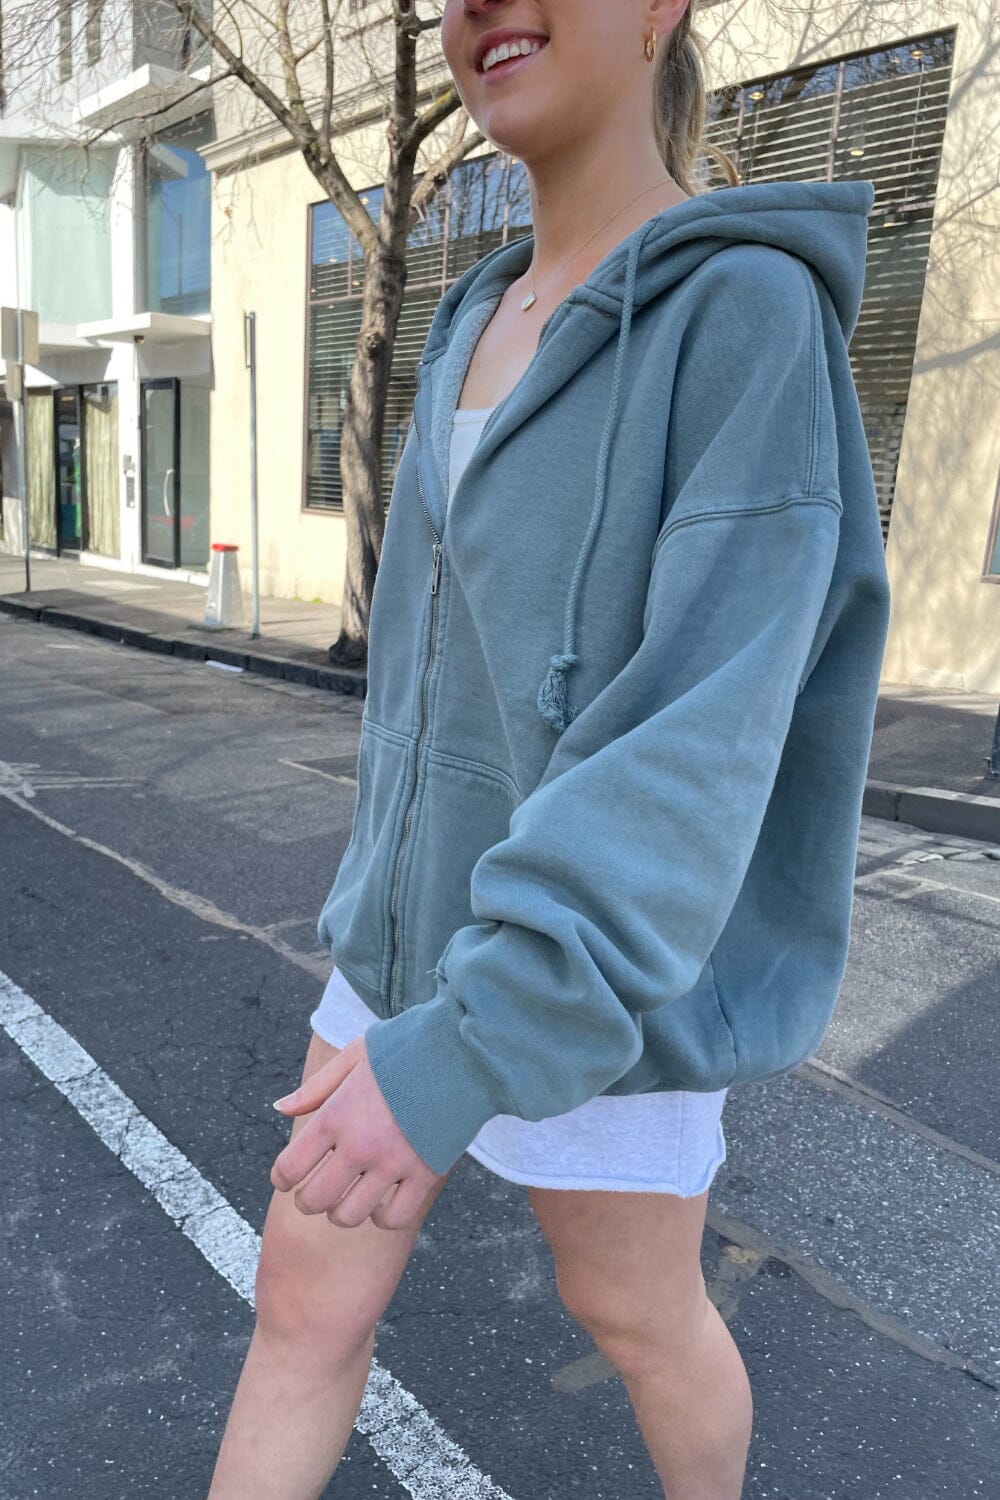 Oversized Christy/Carla Hoodie on someone who's 5'0 (153cm) : r